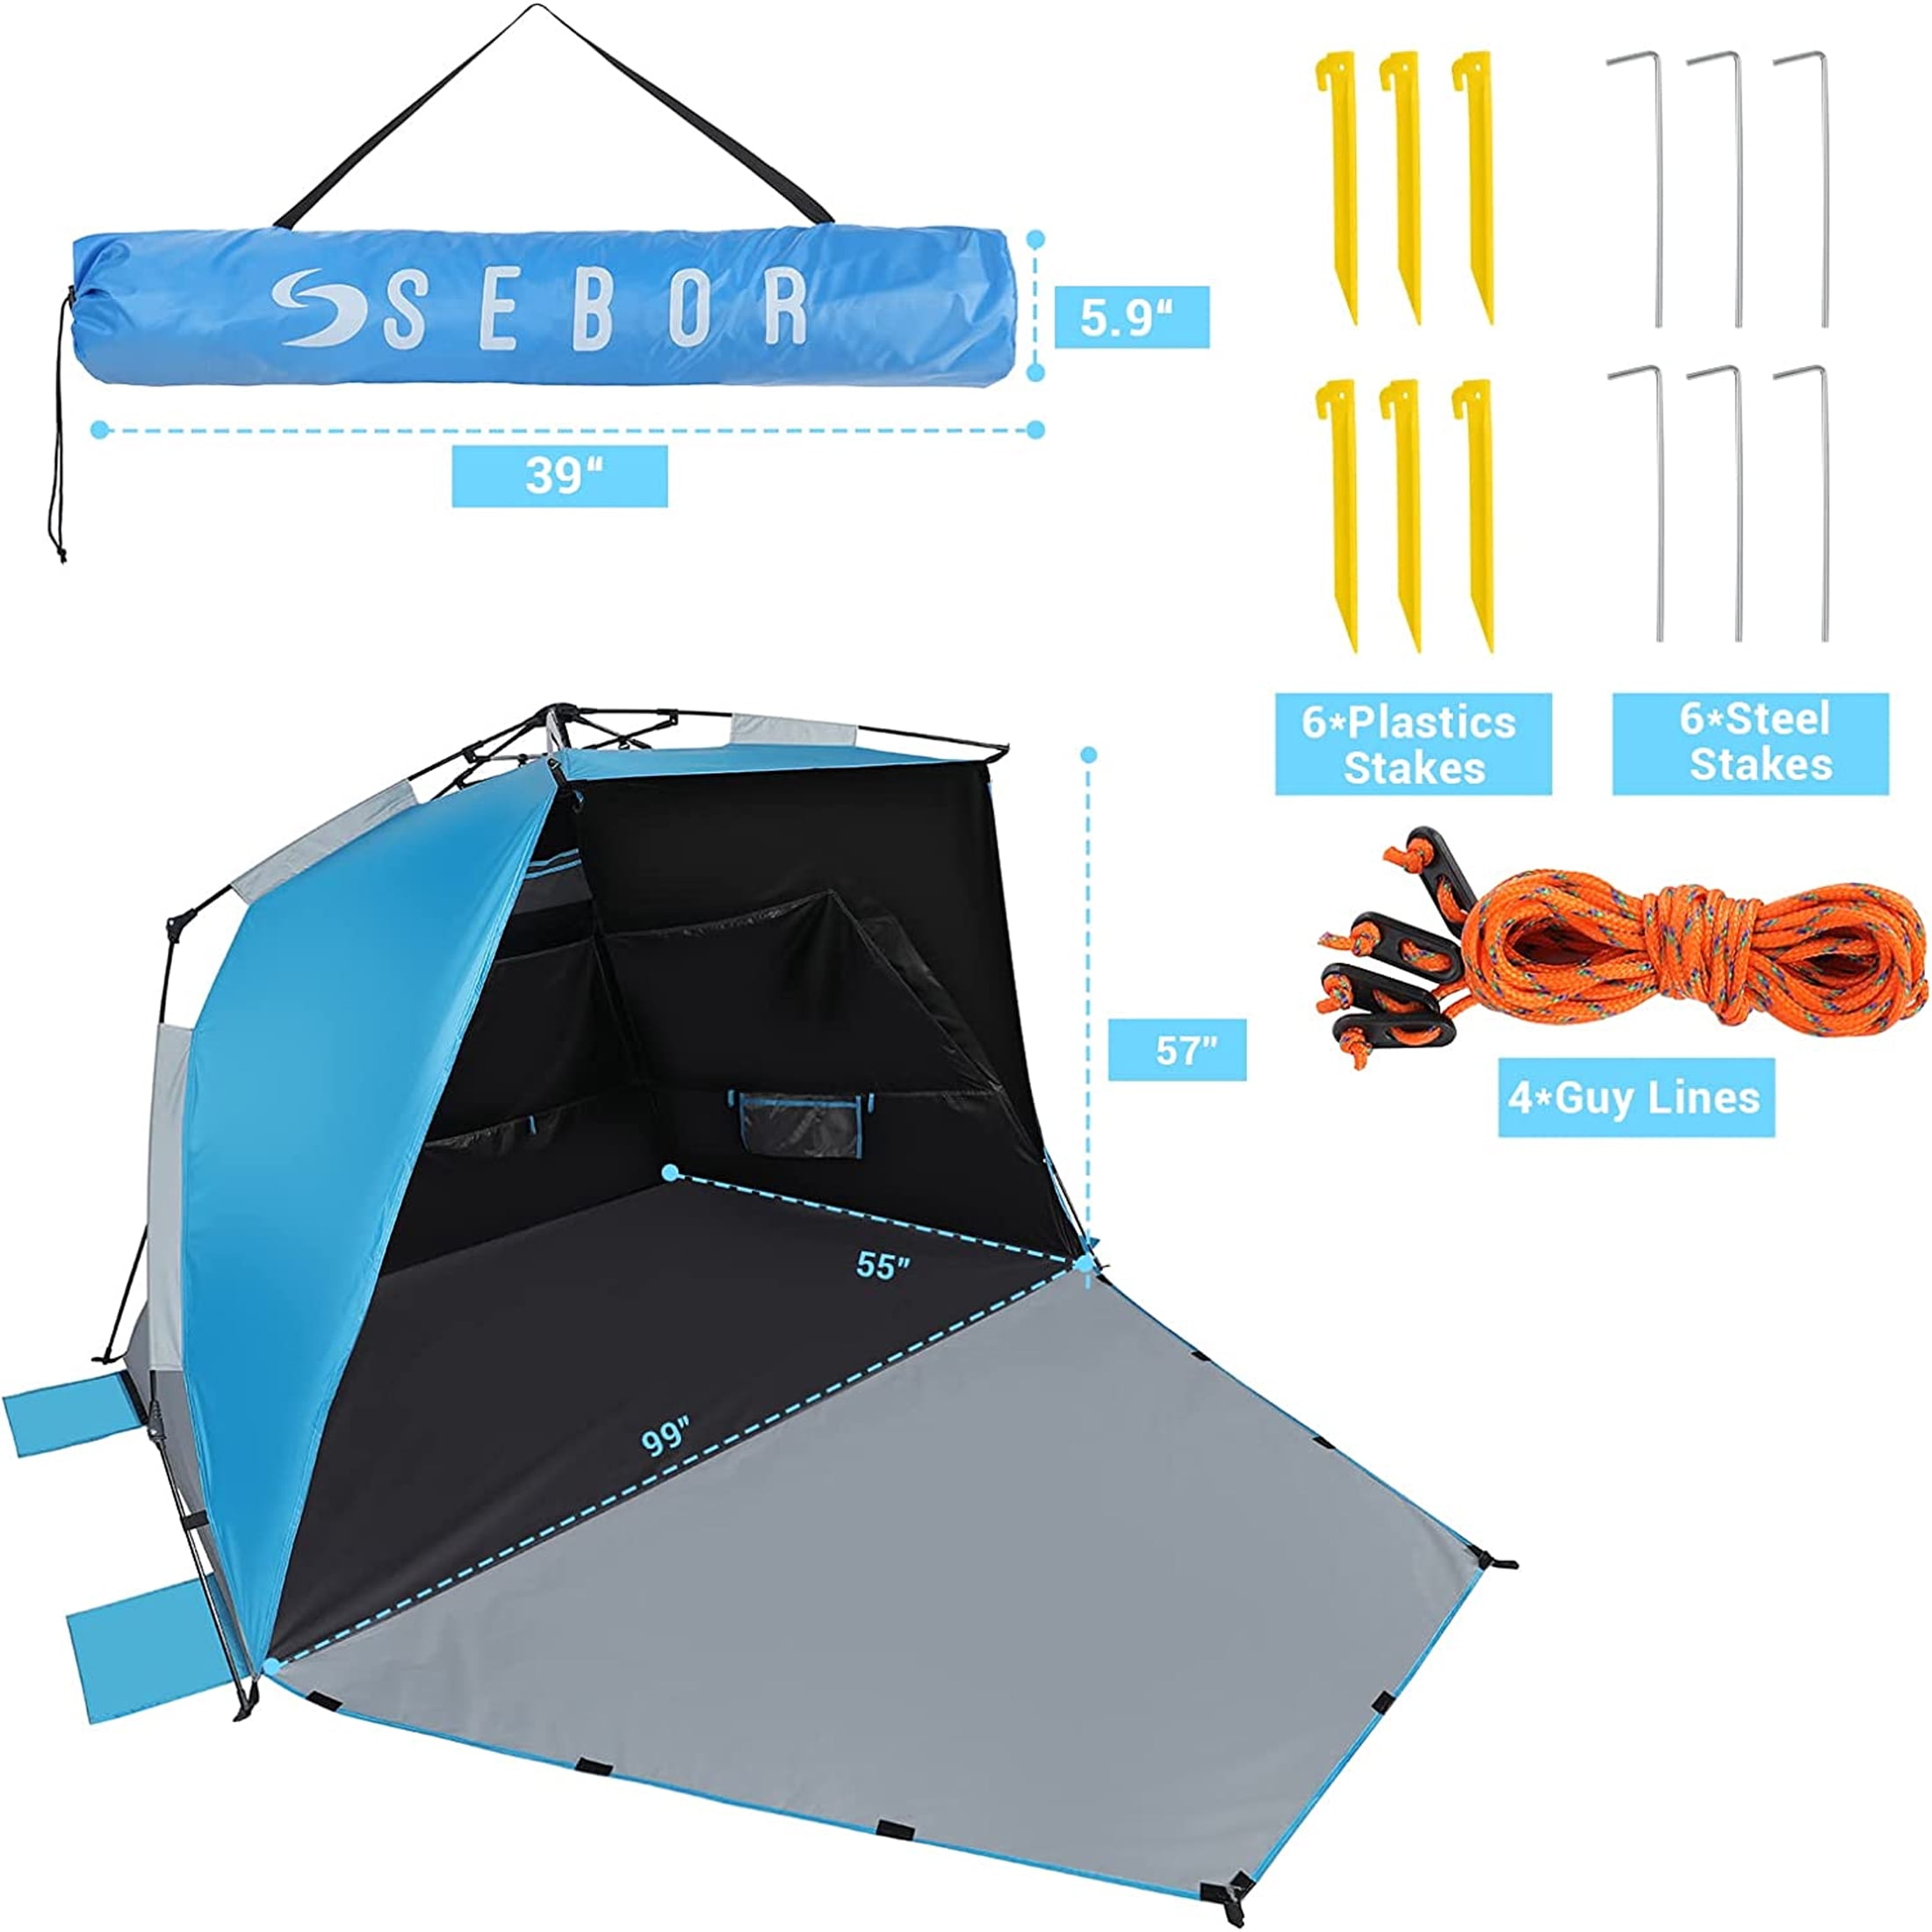 Sebor Beach Tent, Deluxe XL Pop-Up Canopy Cabana Beach Shade Tent for 4-6 Person, UPF 50+ with Dark Shelter Technology, Easy Set Up and Portable